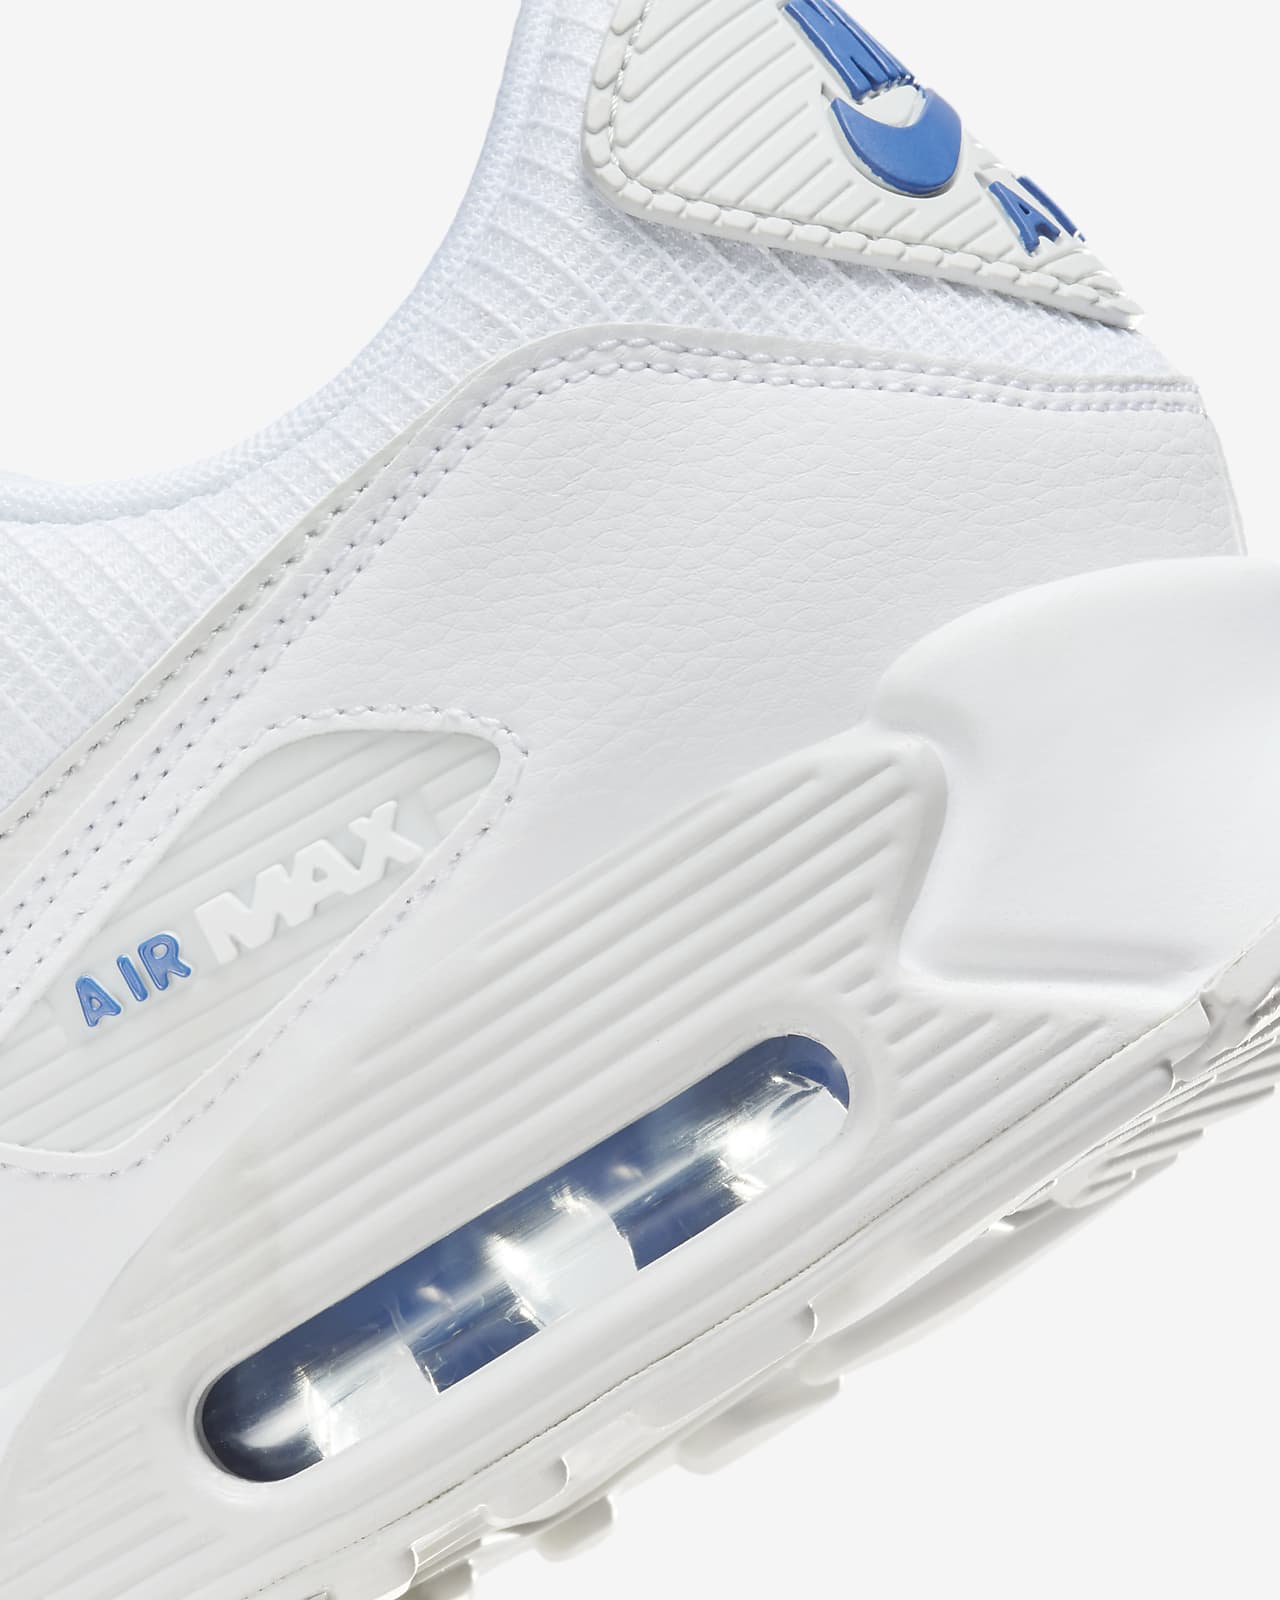 Men's White Air Max 90 Shoes. Nike IN